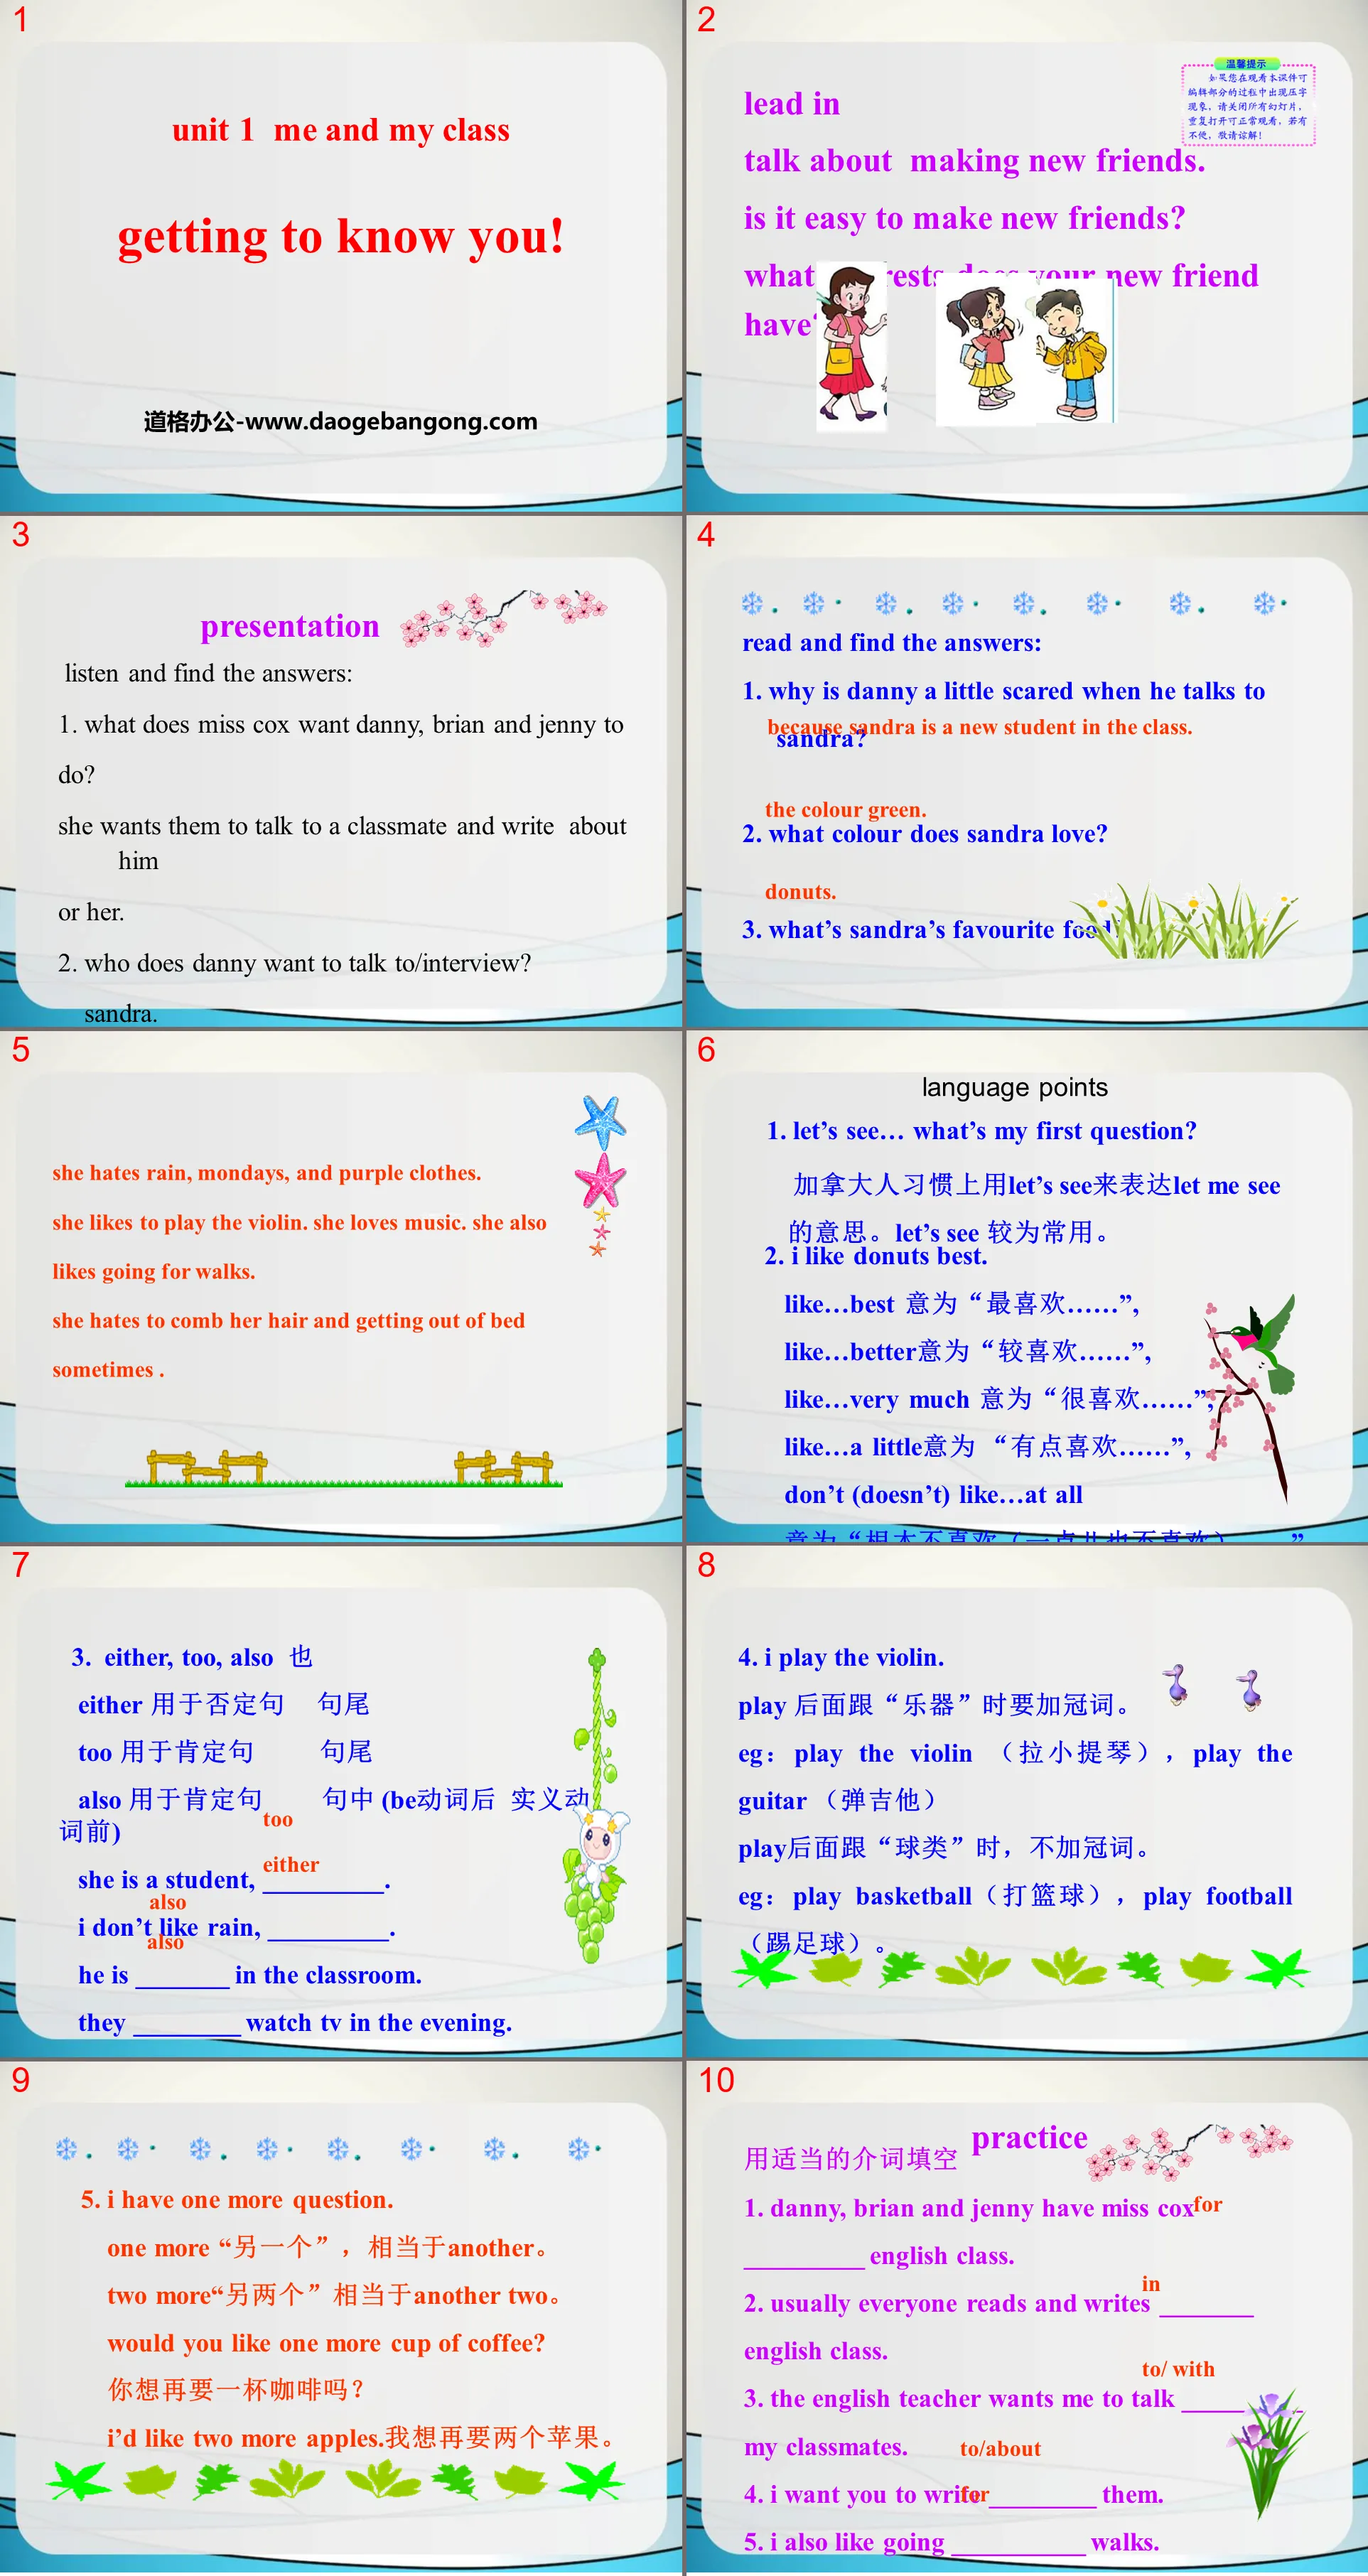 《Getting to know you》Me and My Class PPT教学课件
